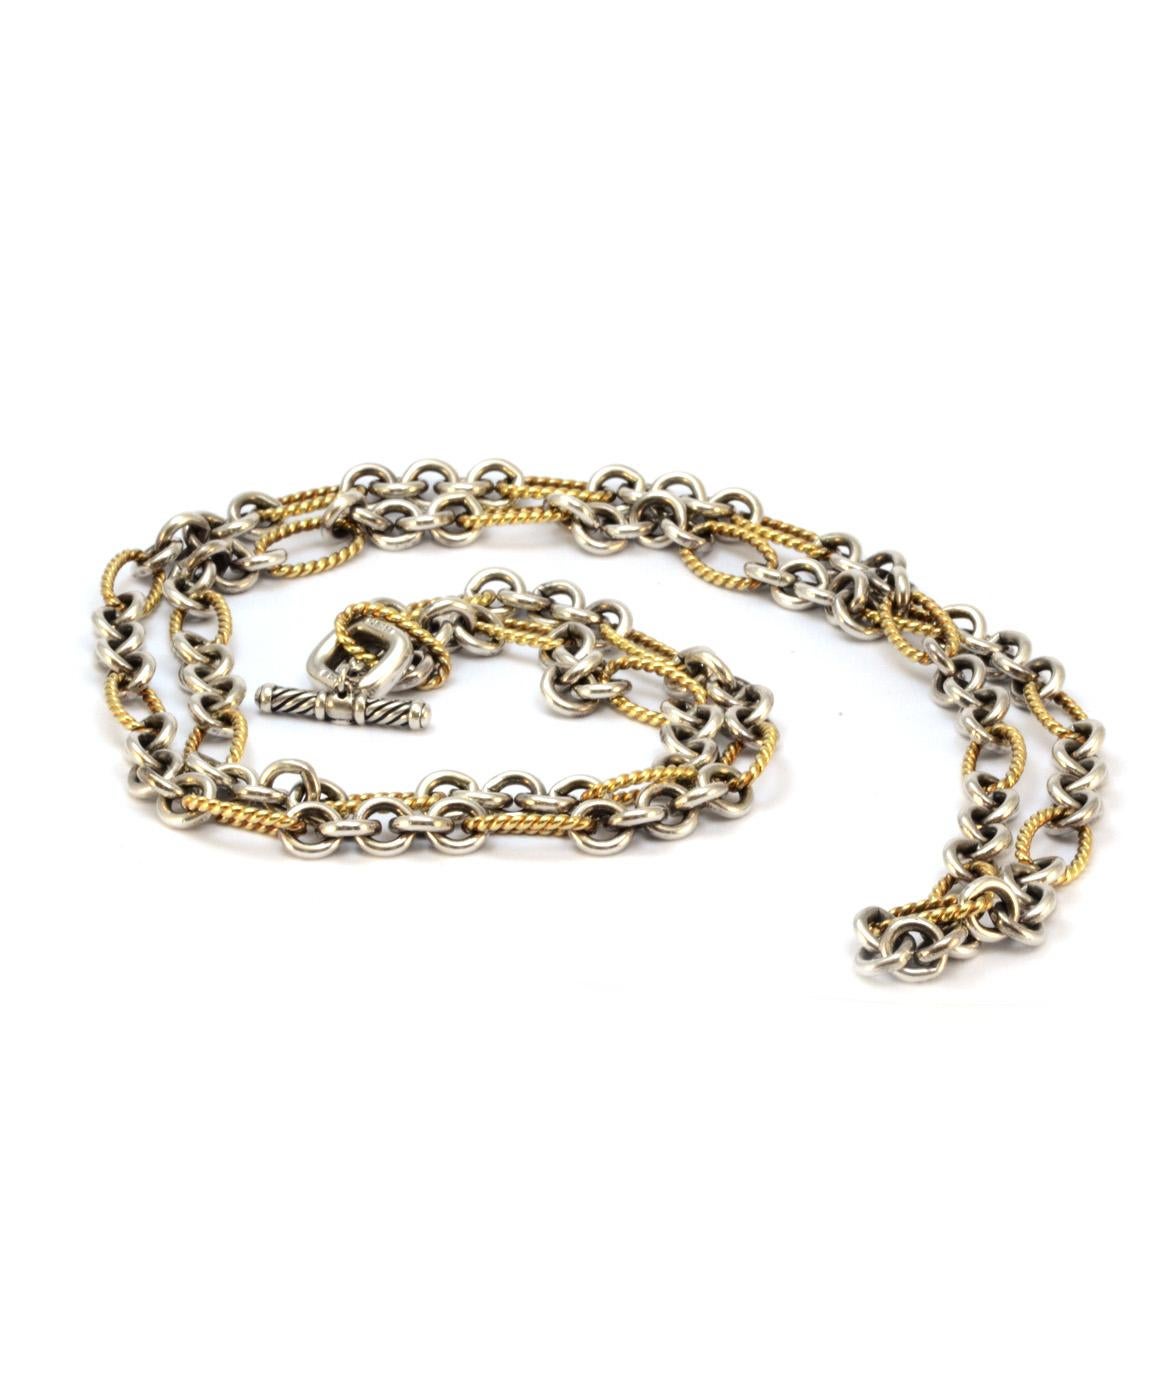 100% Authentic David Yurman Solid 18K Yellow Gold & Sterling Silver Chain.This two-toned authentic chain is in excellent condition. It is approximately 36